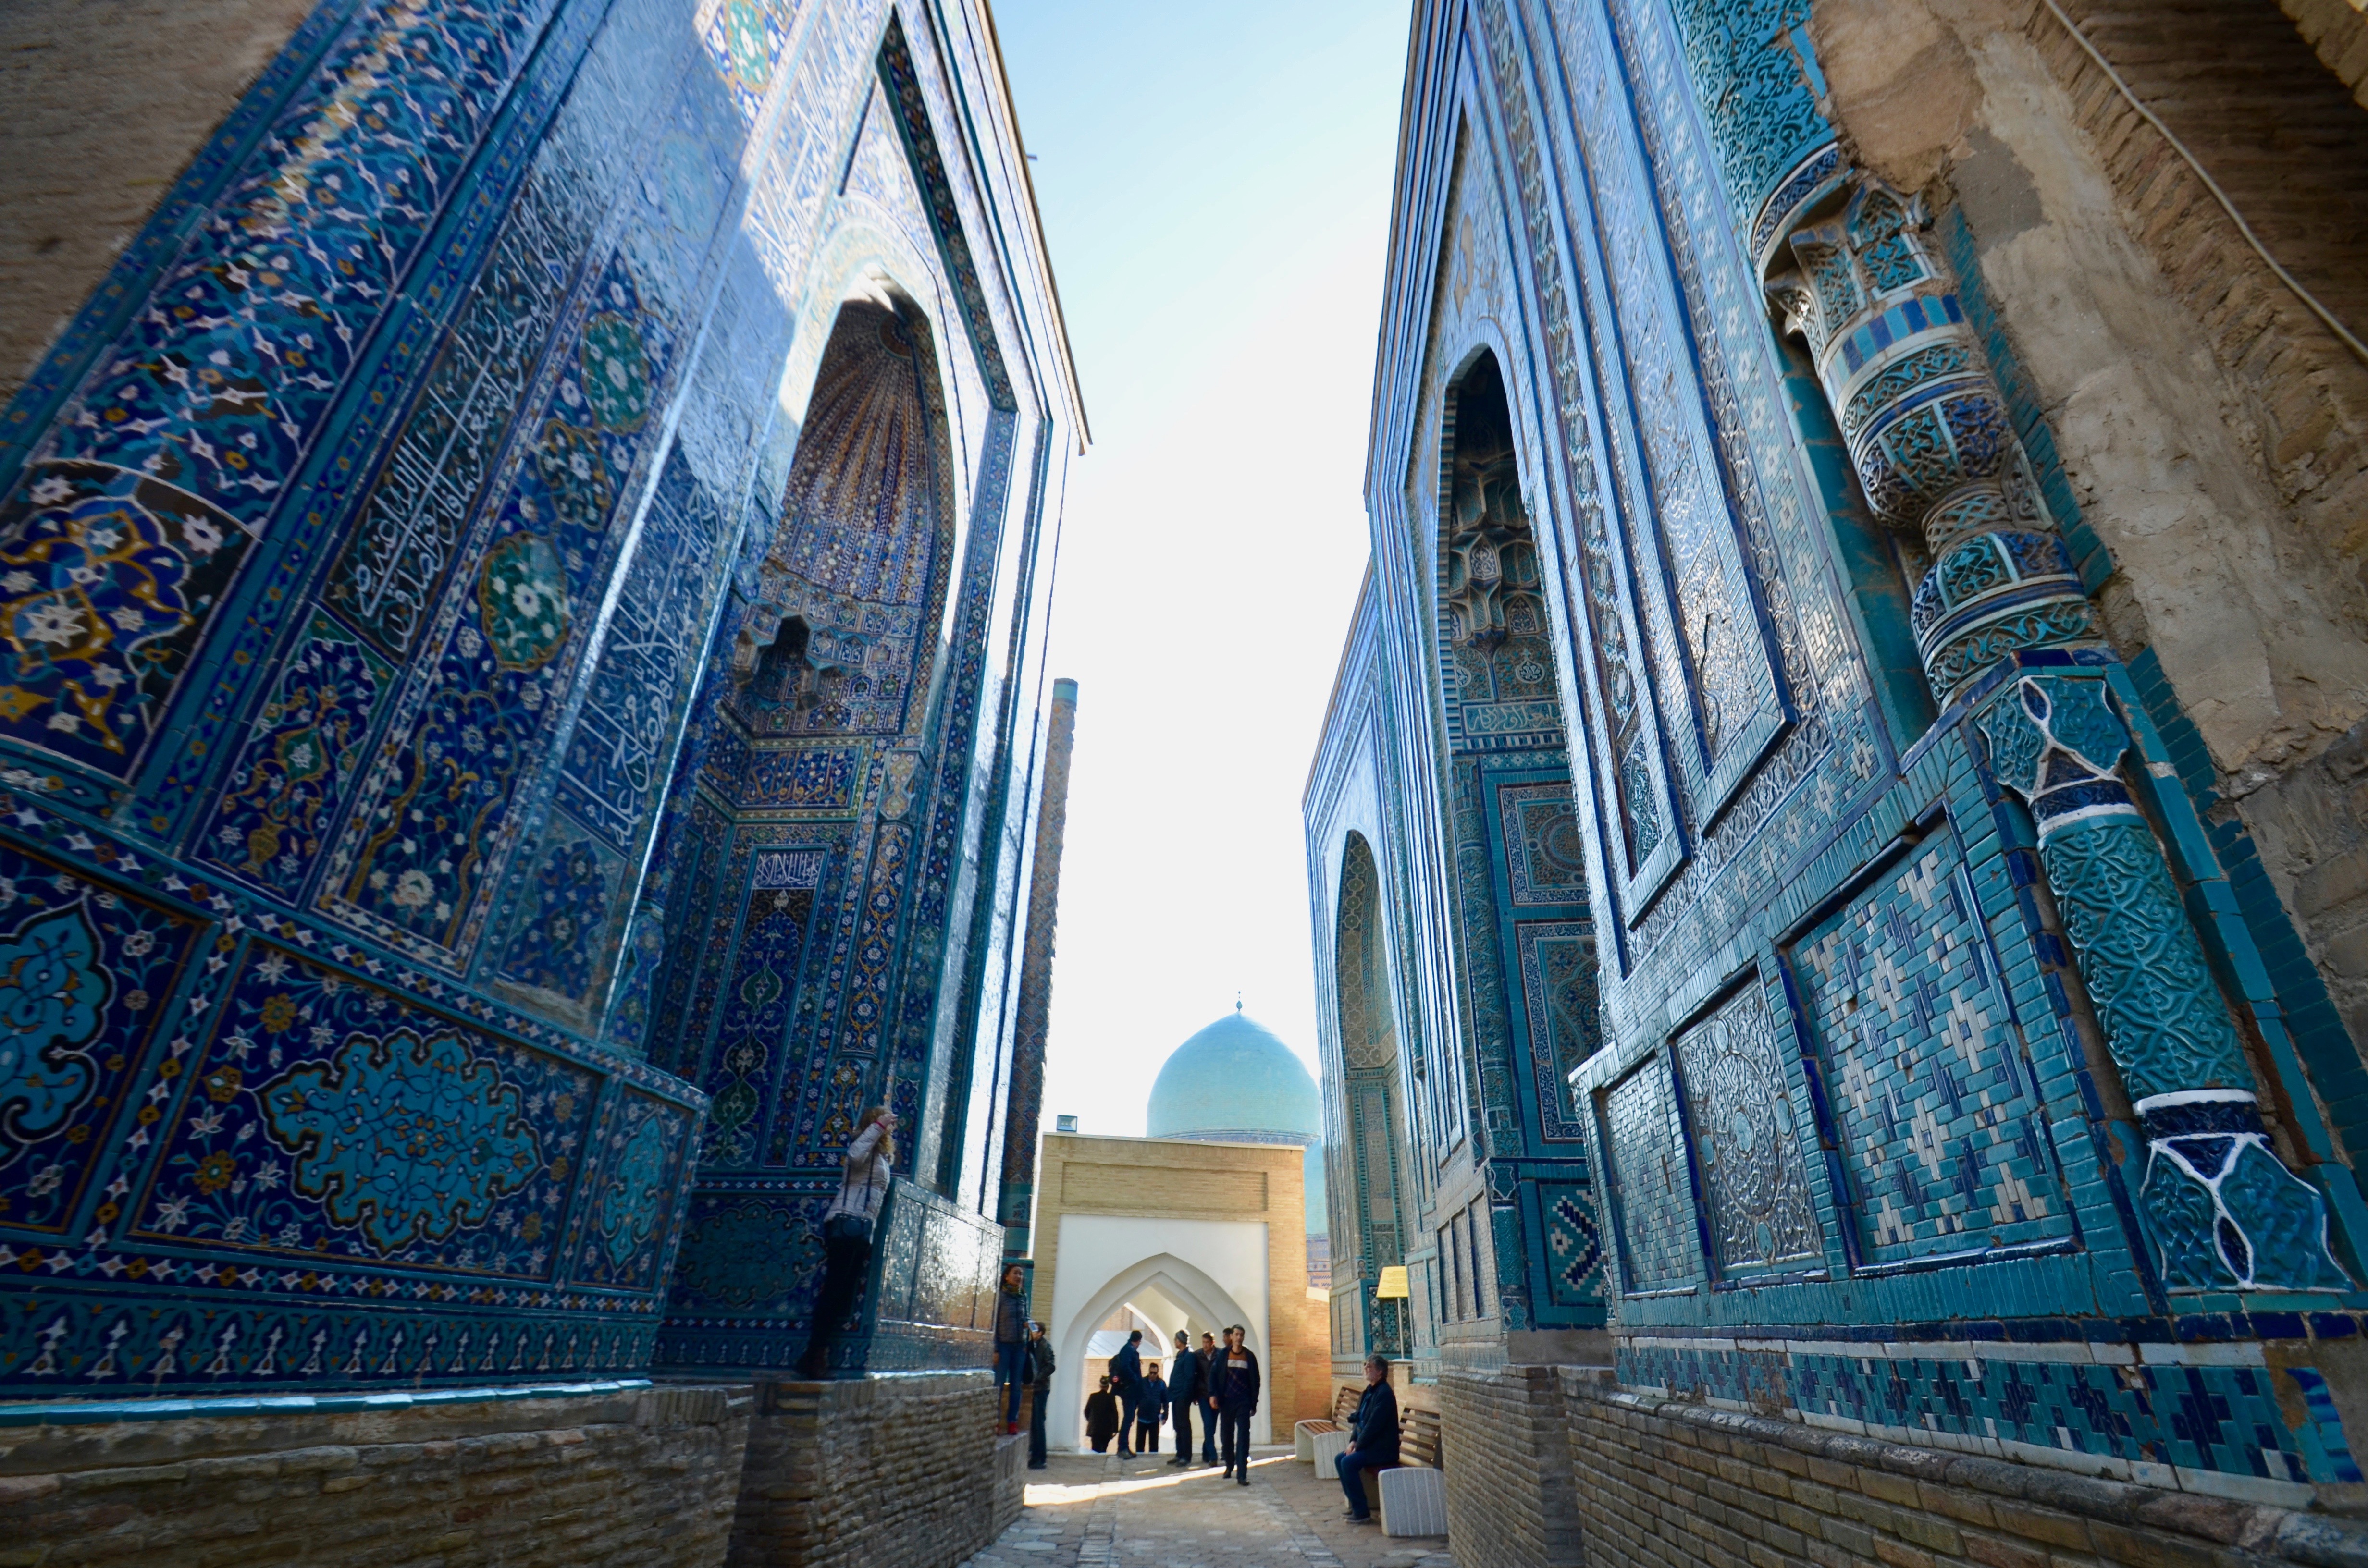 Magnificant Samarkand. Beautiful Bukhara. Ancient Khiva. Modern Tashkent. Traveling Uzbekistan will not only reward the adventurous traveler with magnificent ancient Silk Road architecture, but also with interesting and surprising experiences in a country that is in the process of opening its doors to the world. 